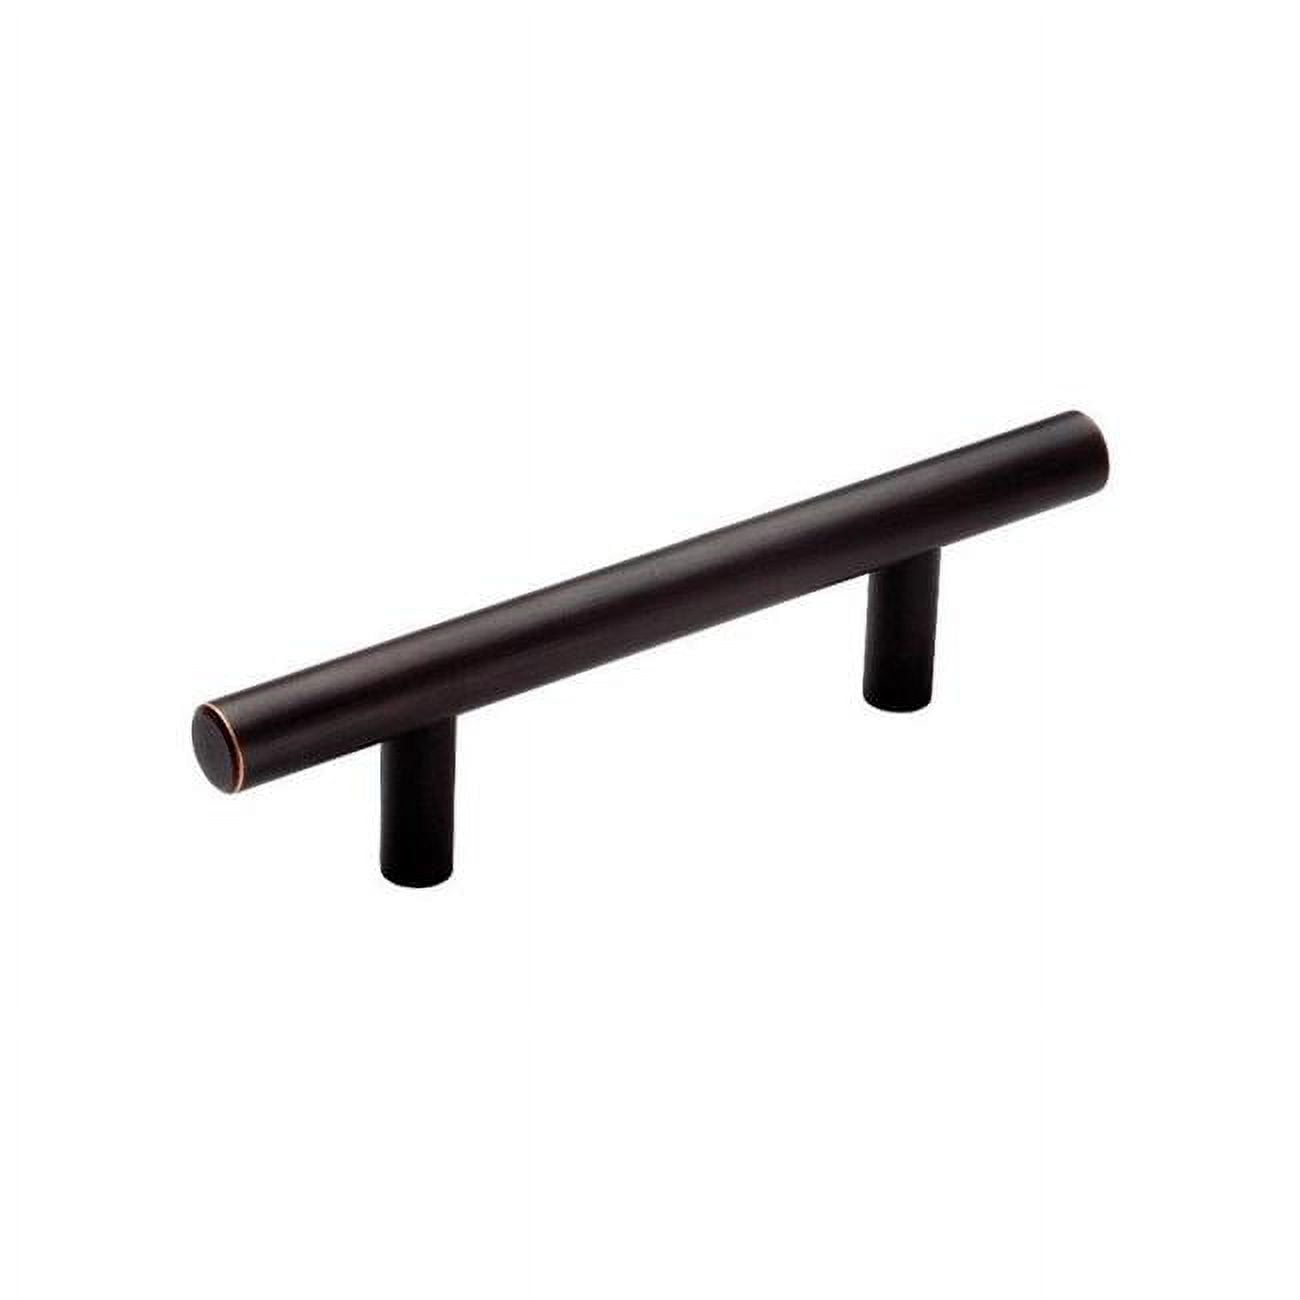 Amerock 5000006 3 In. Bar Cabinet Pull, Oil-rubbed Bronze - Pack Of 5